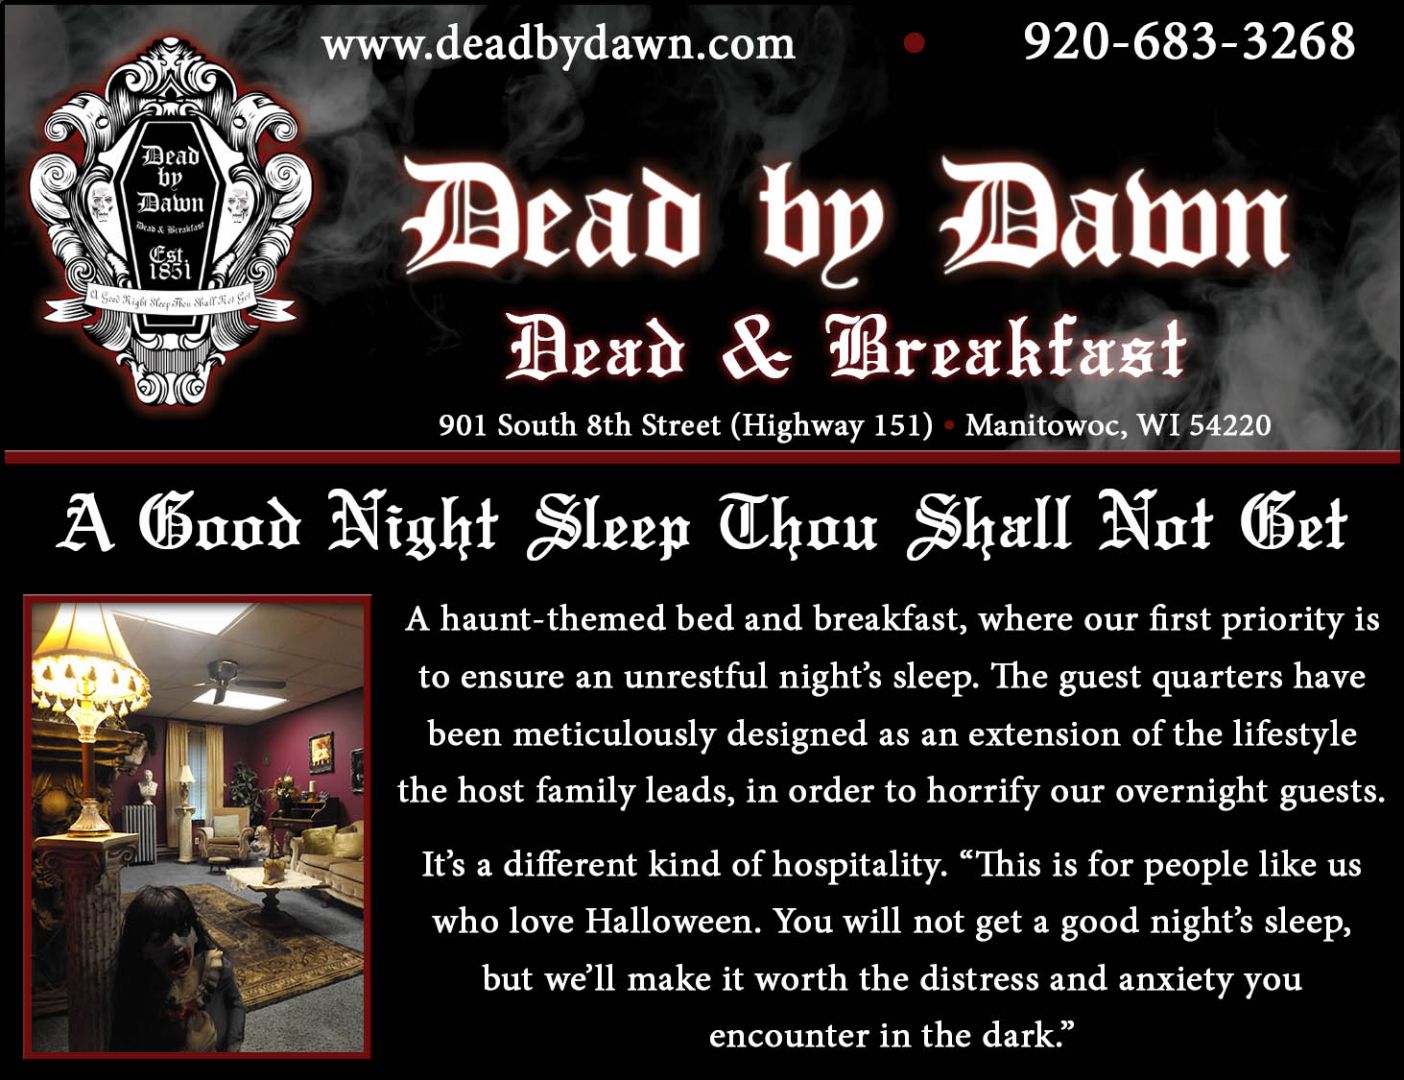 This is a photo of Dead by Dawn Dead & Breakfast haunted house.